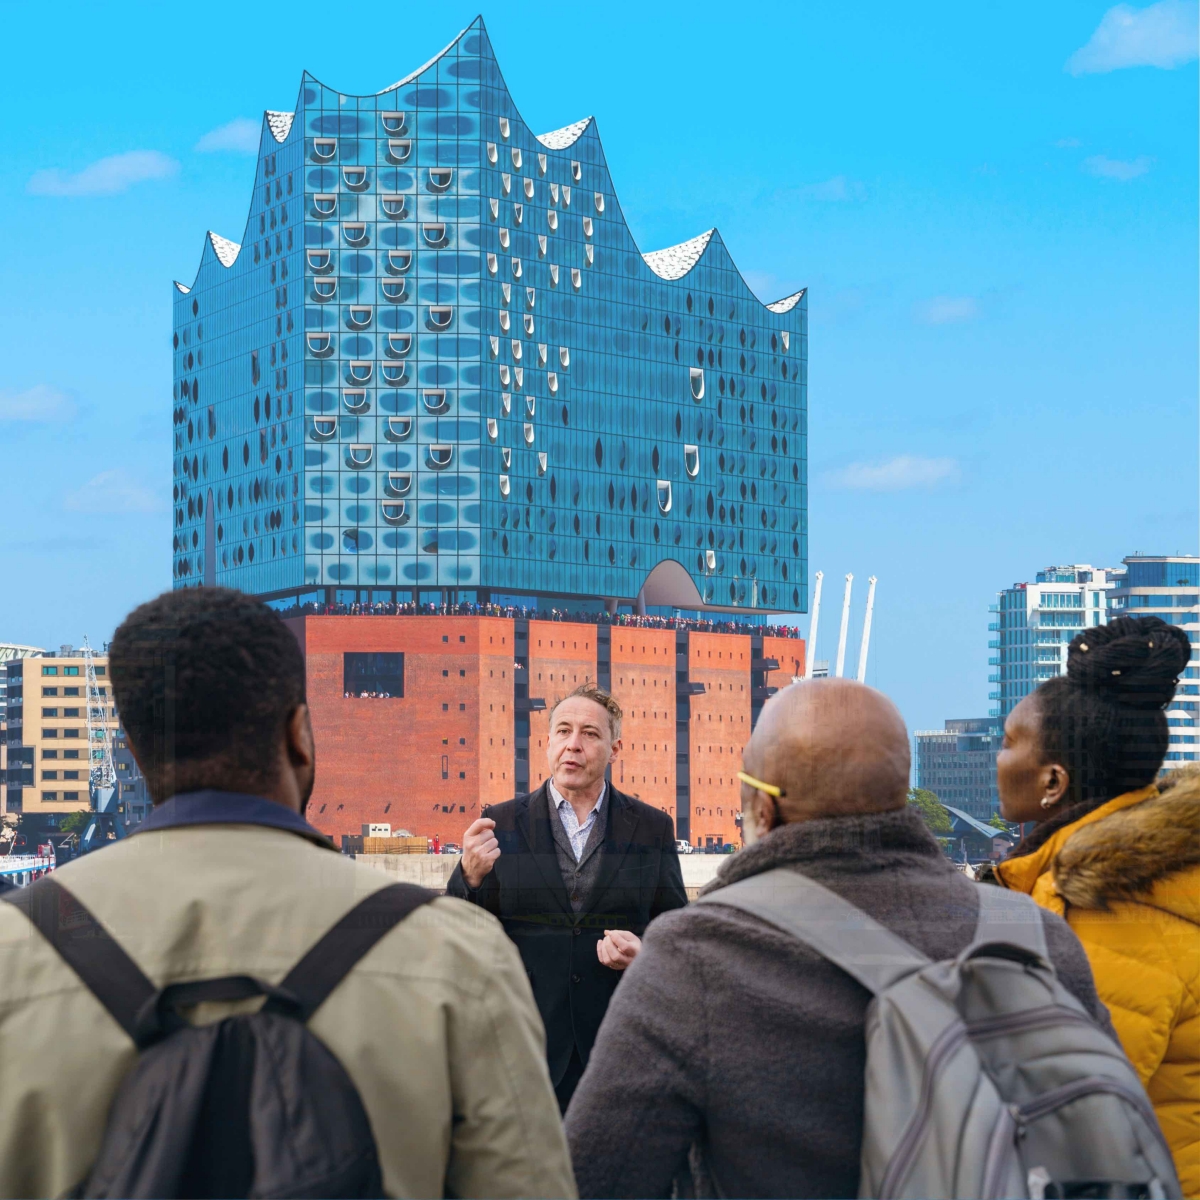 Almost no walking tour with a local guide in Hamburg is complete without visiting a local landmark - the modern building of Elbphilharmonie